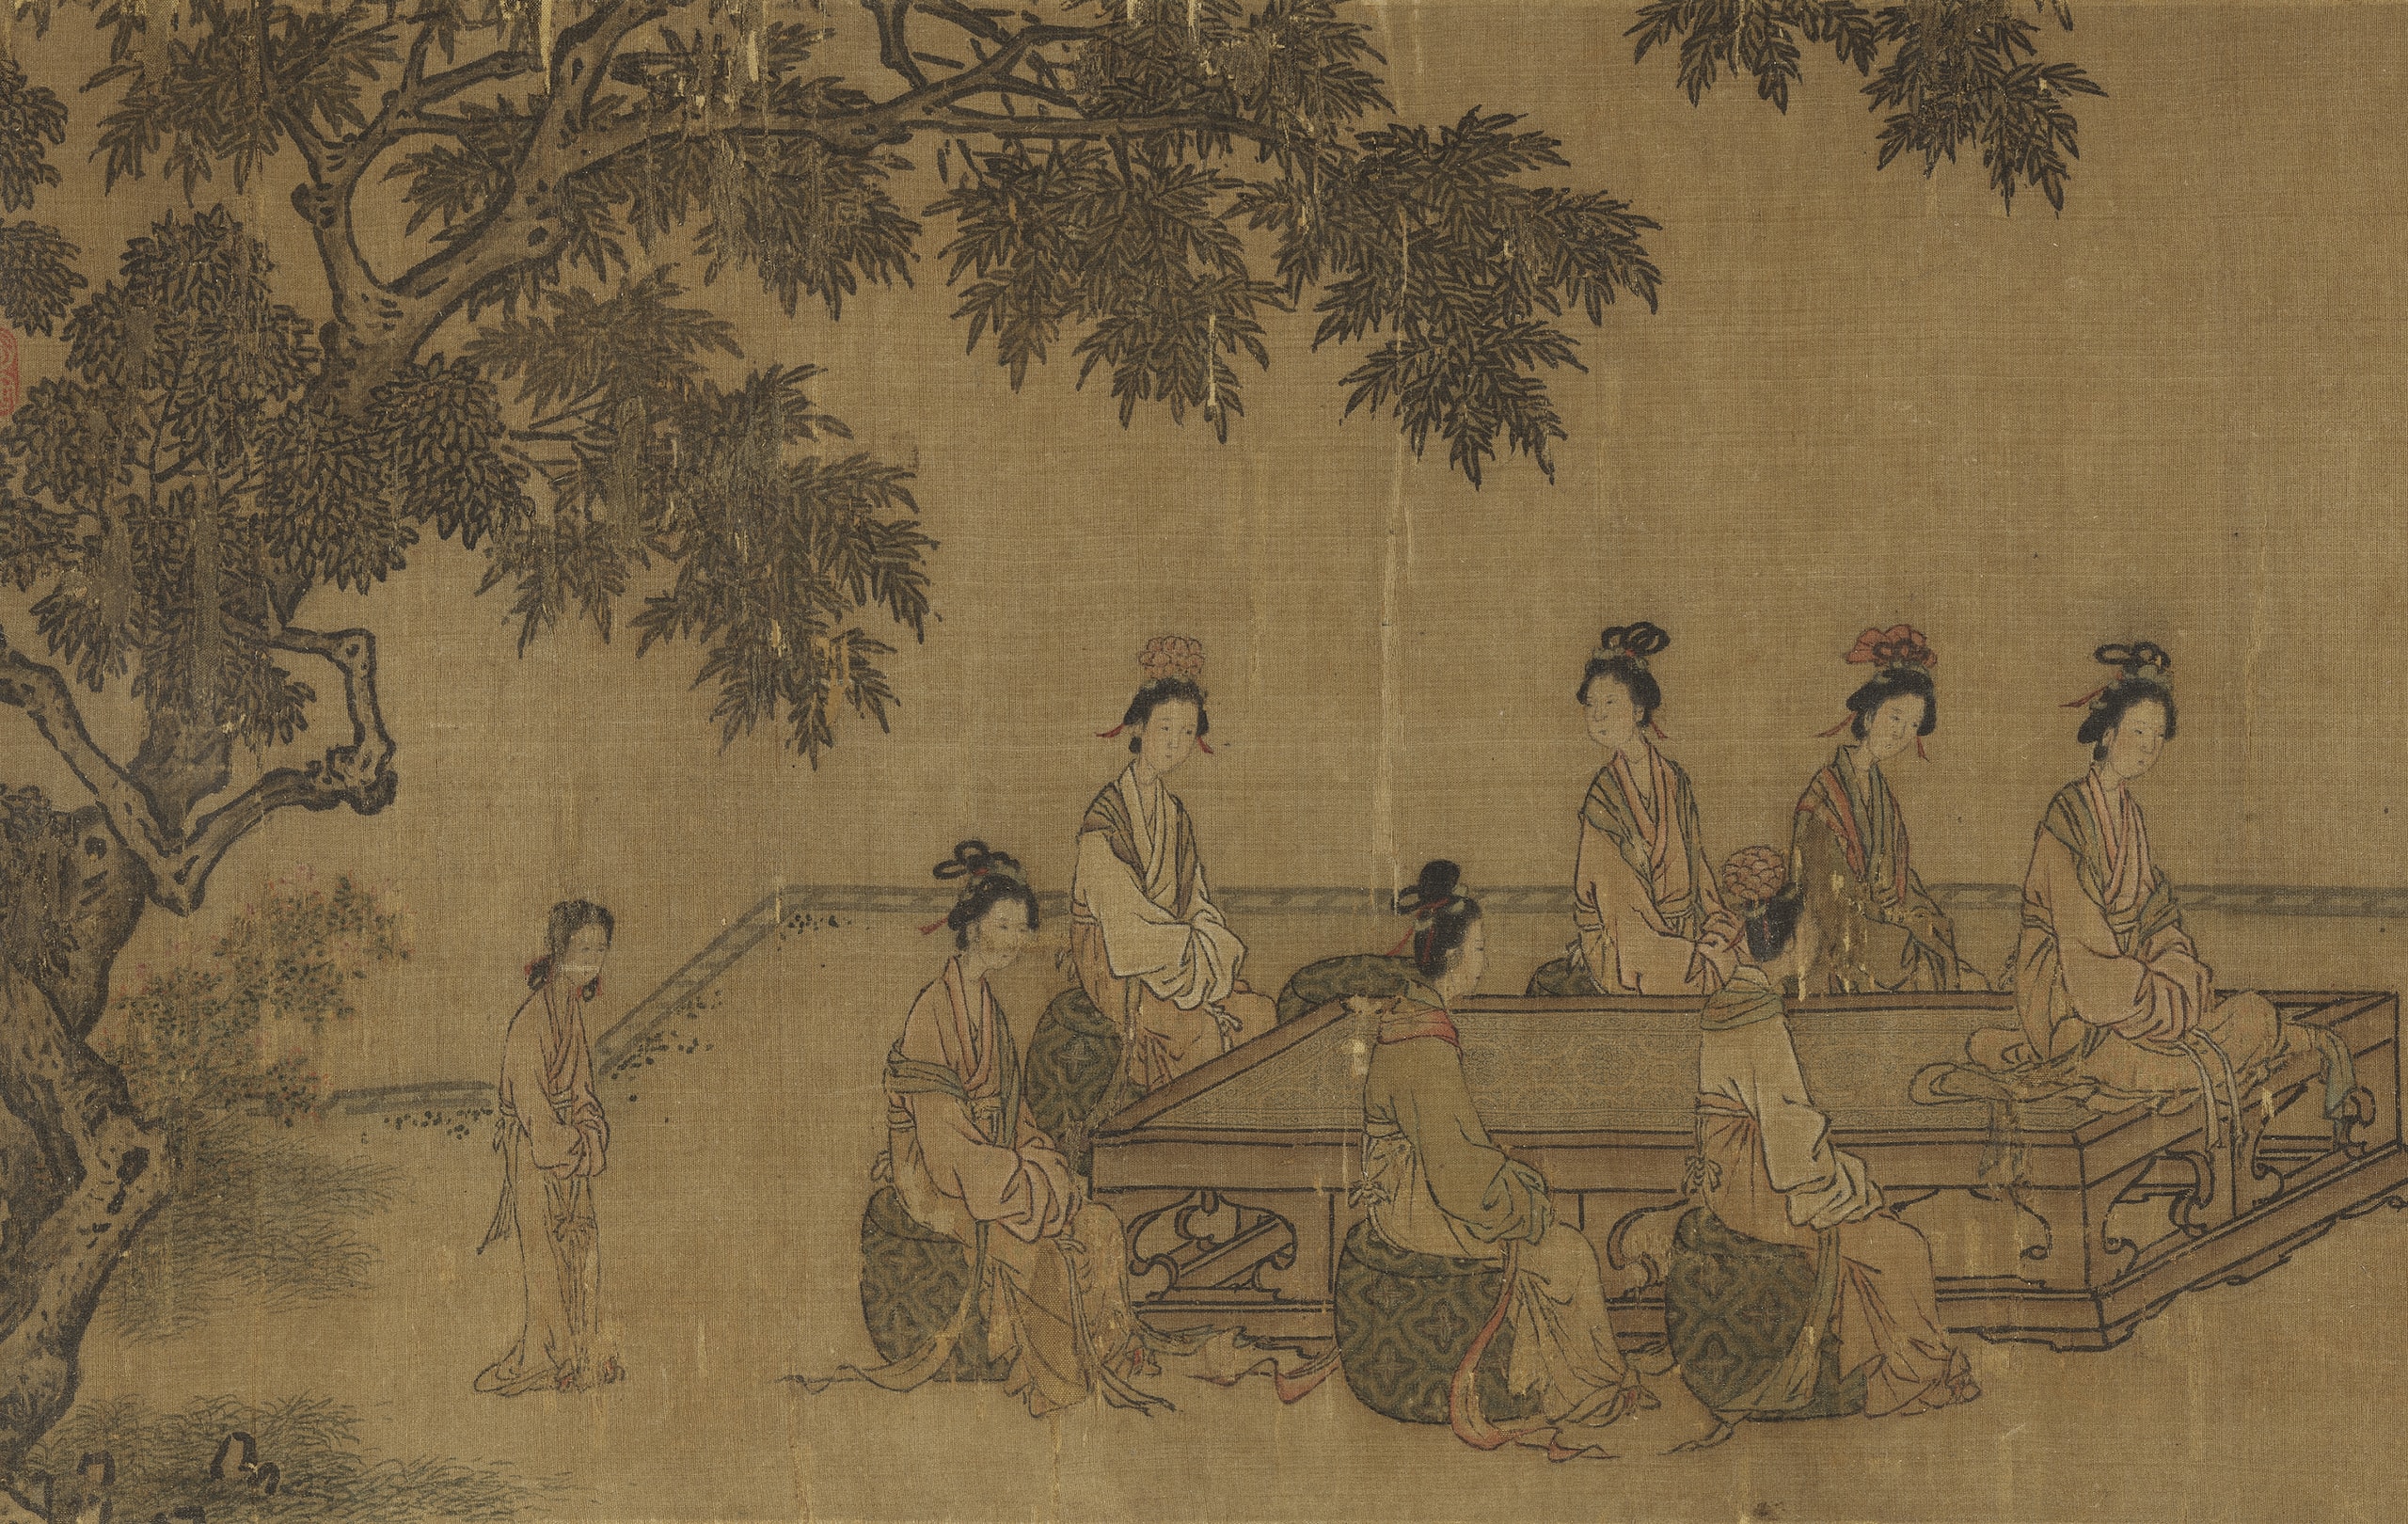 The Ladies' Book of Filial Piety (Scroll 1)